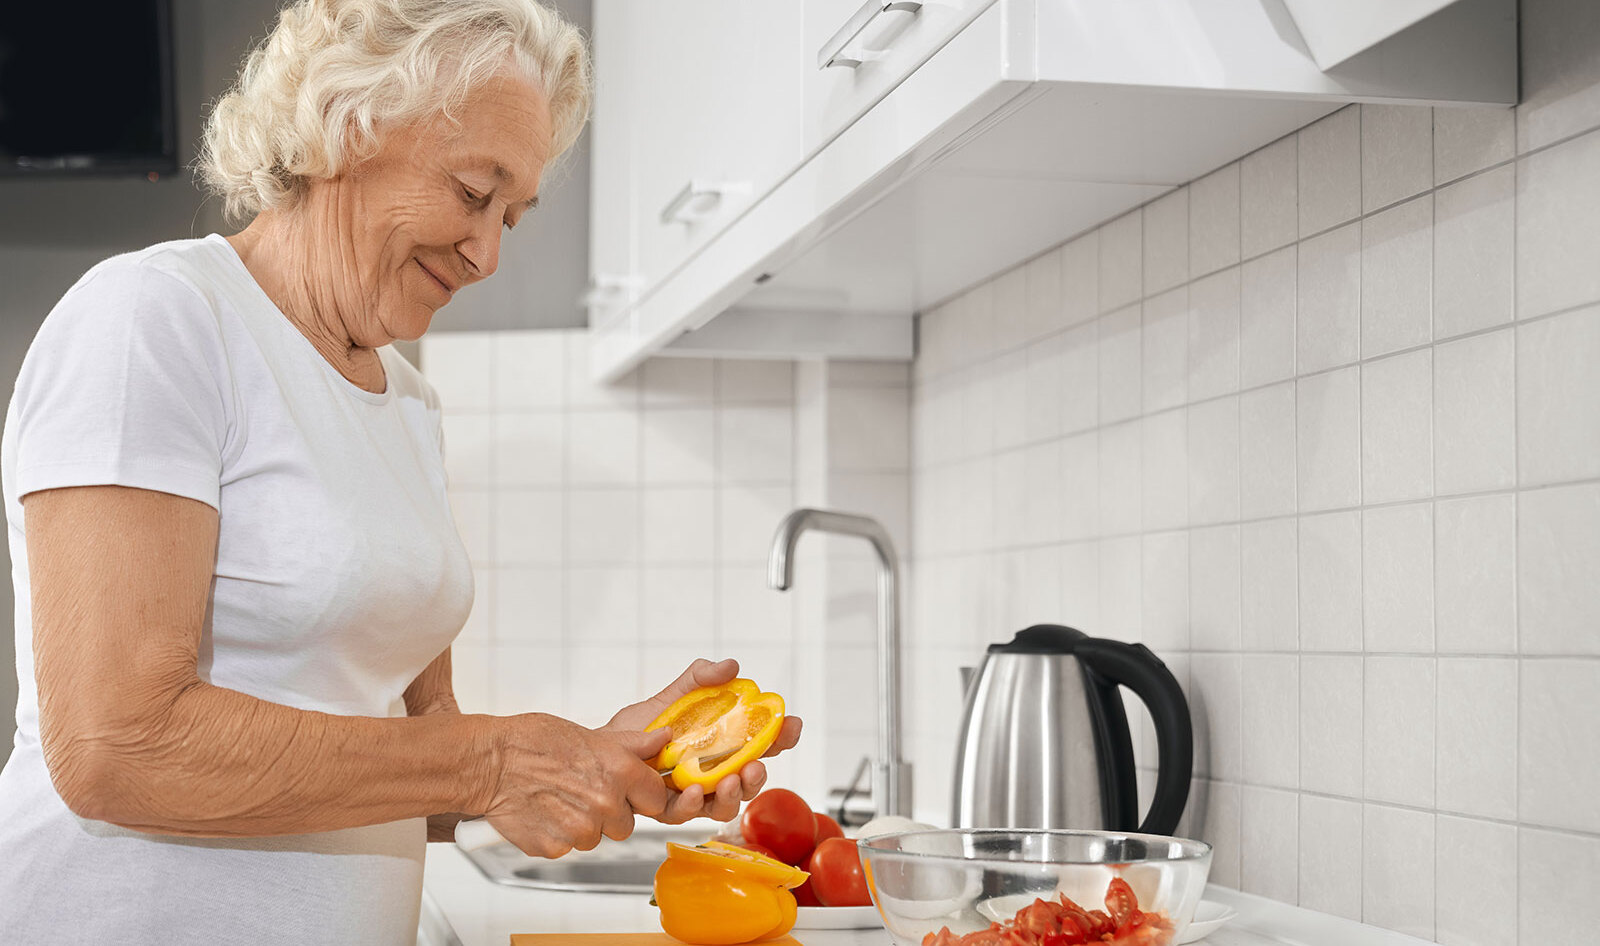 Study: Plant-Based Diet Lowers Risk of Osteoporosis in Women Over 60